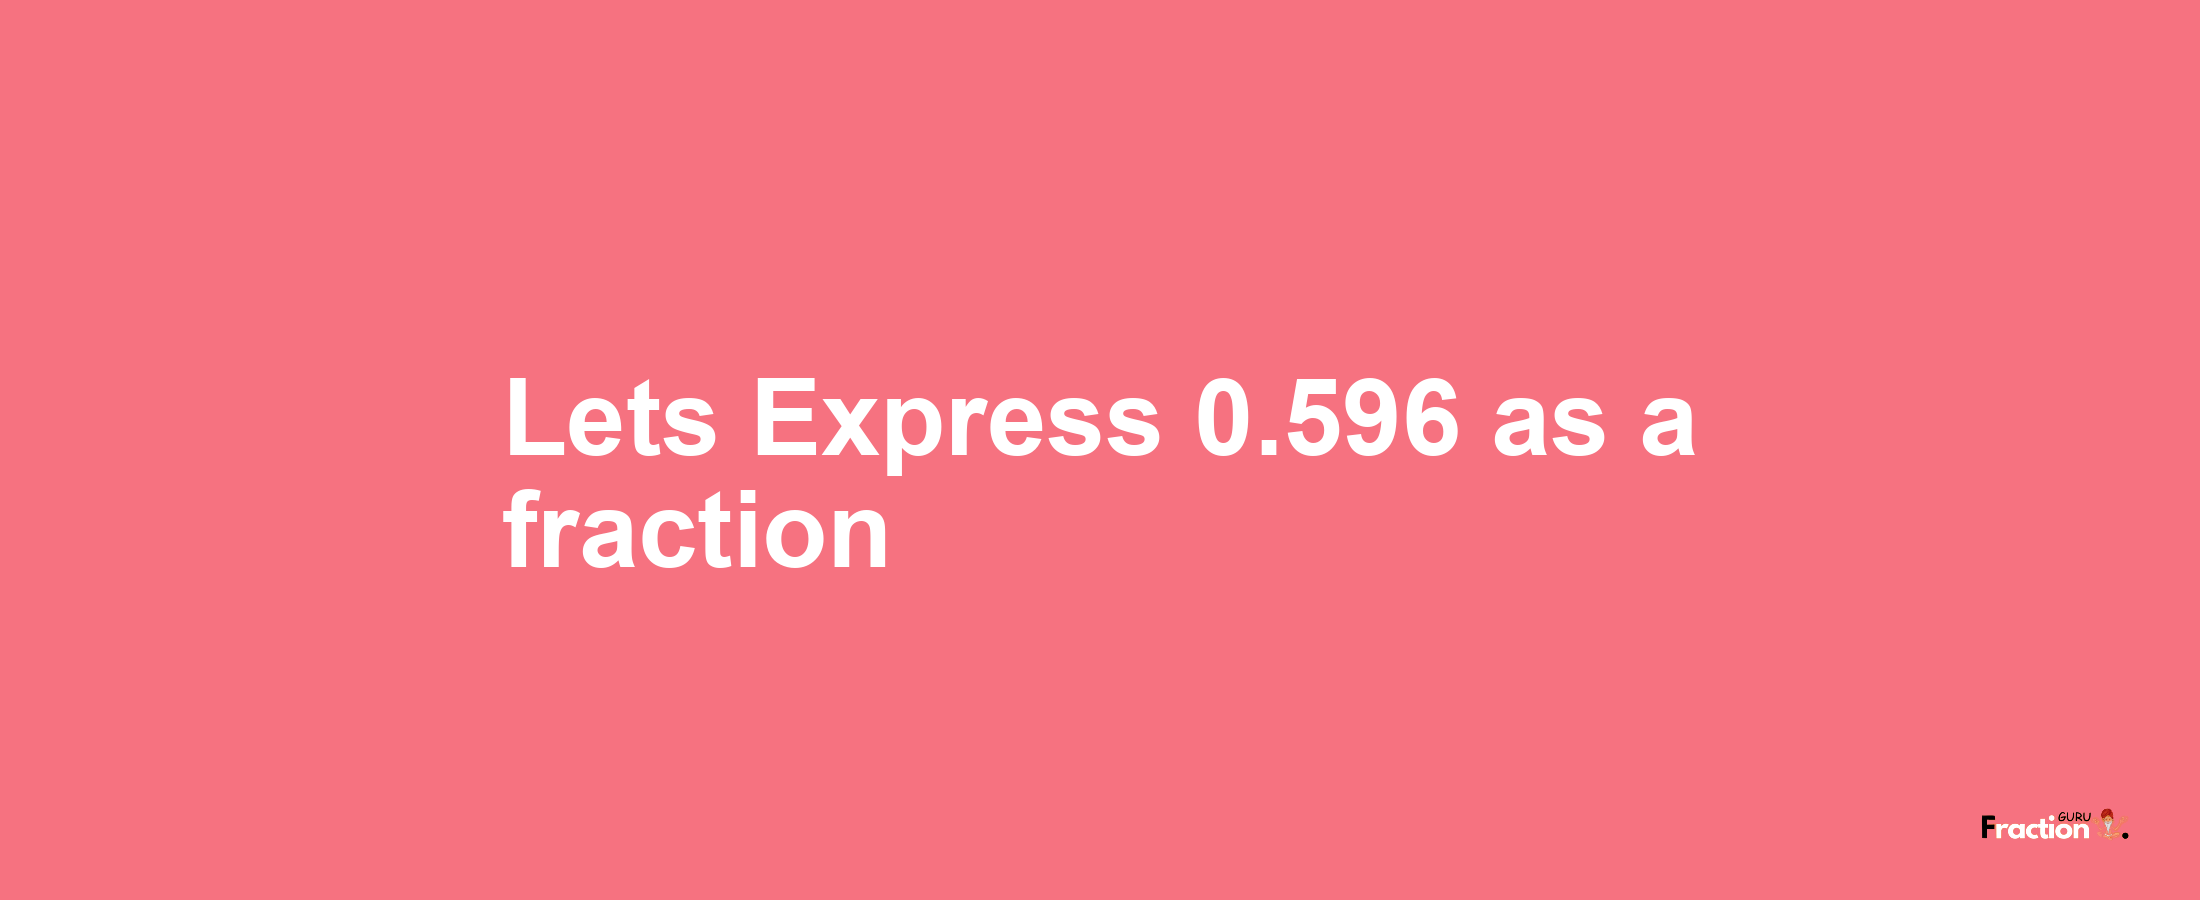 Lets Express 0.596 as afraction